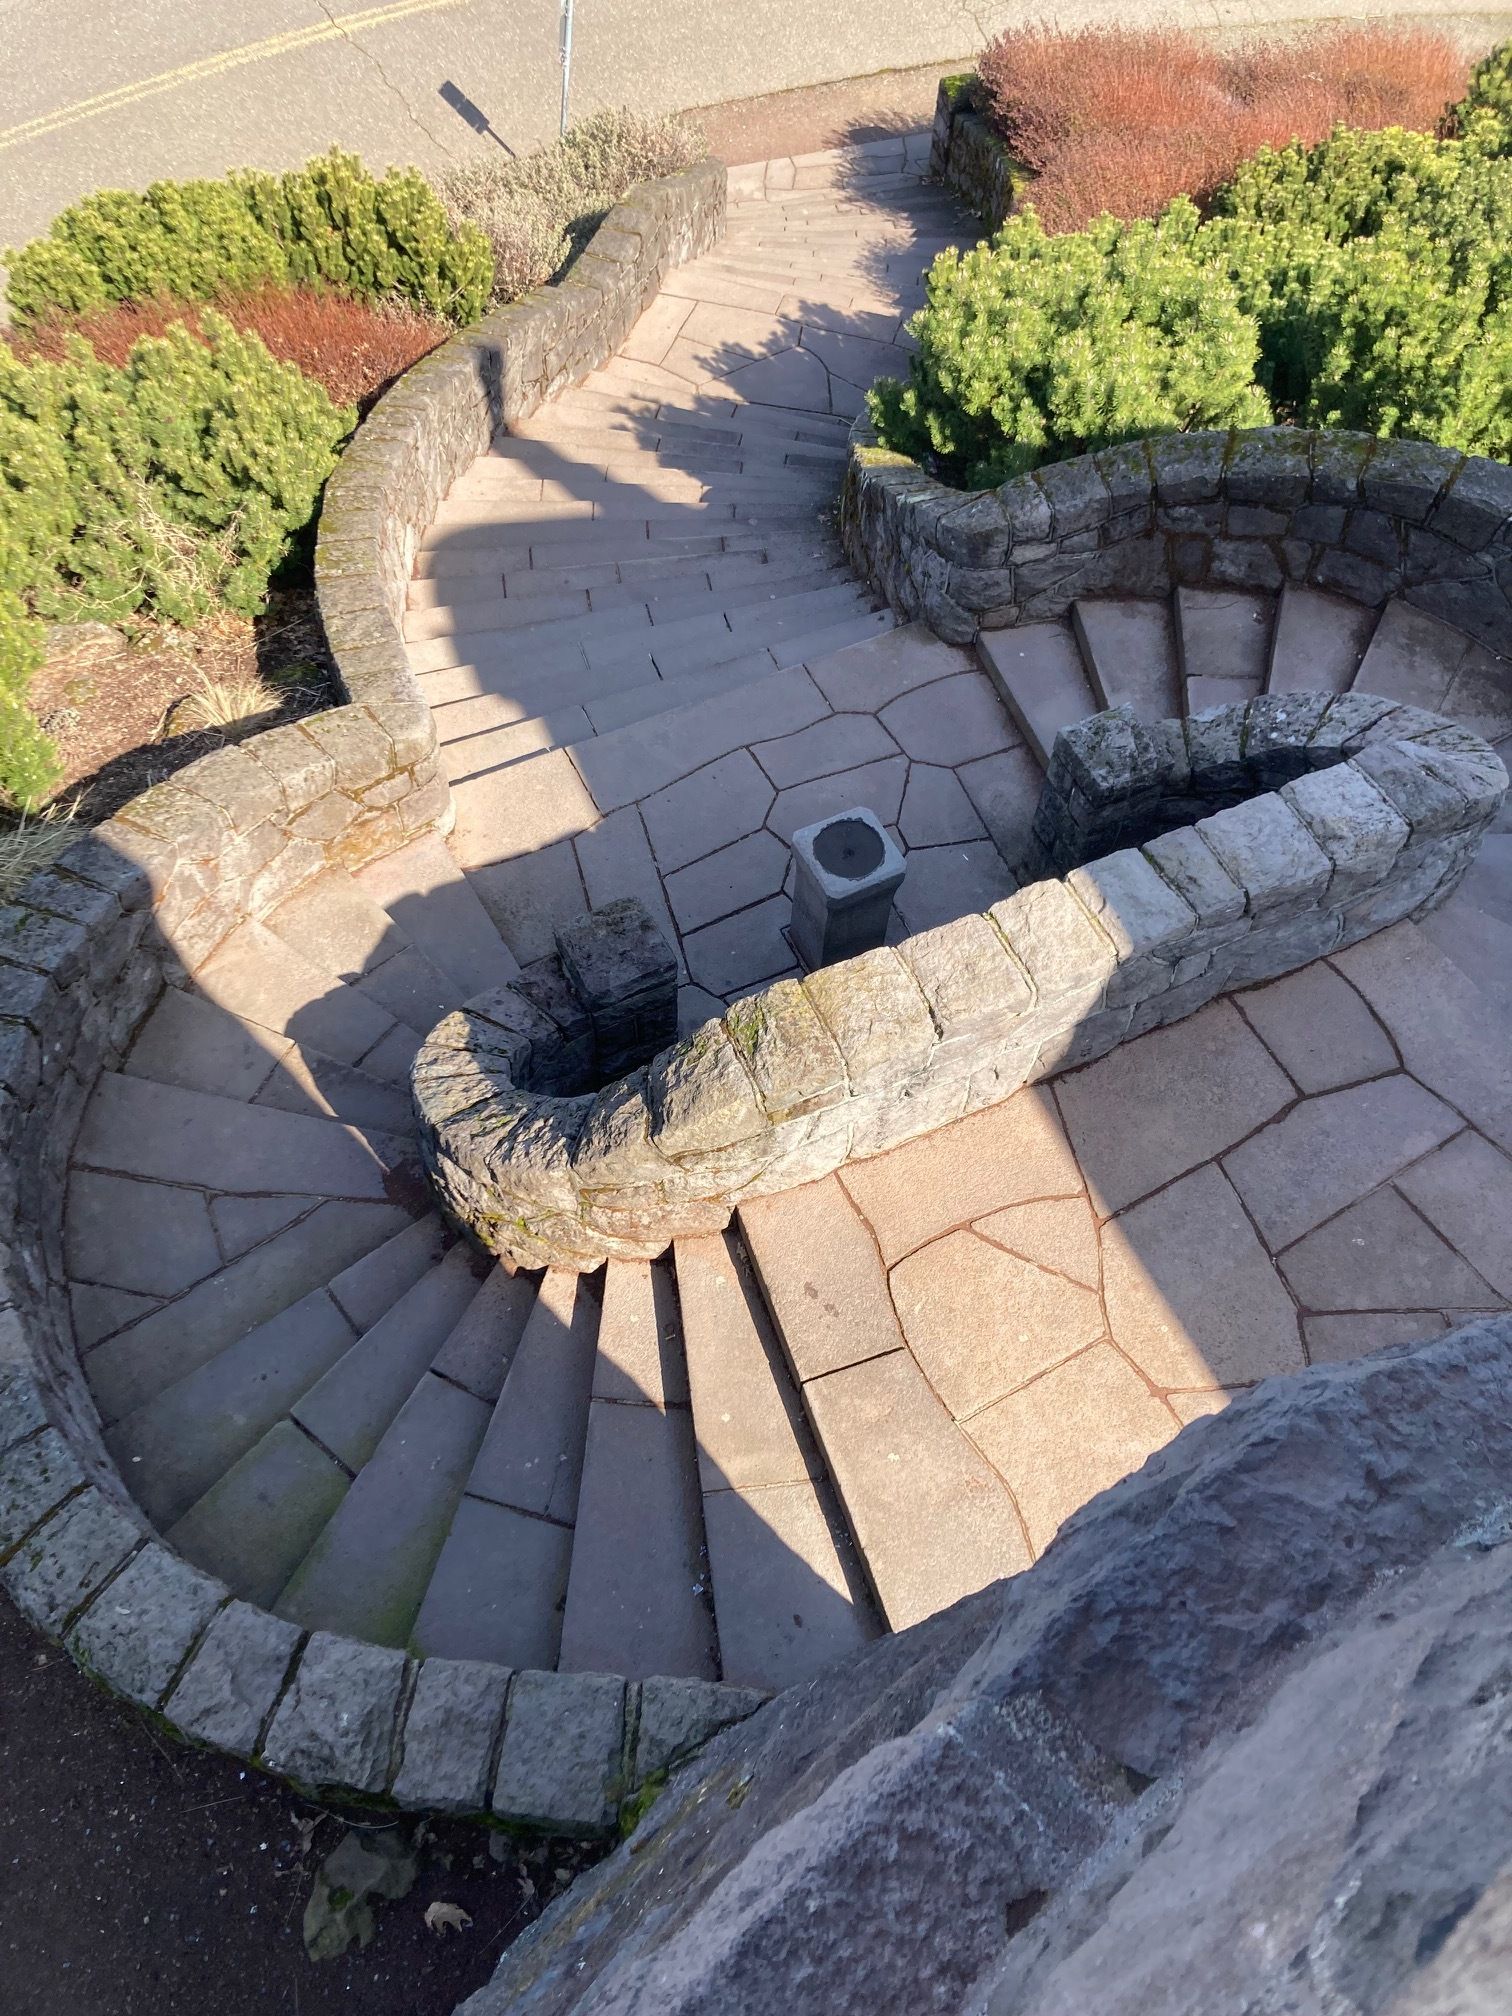 Two circular stone staircases meet and descend as one.